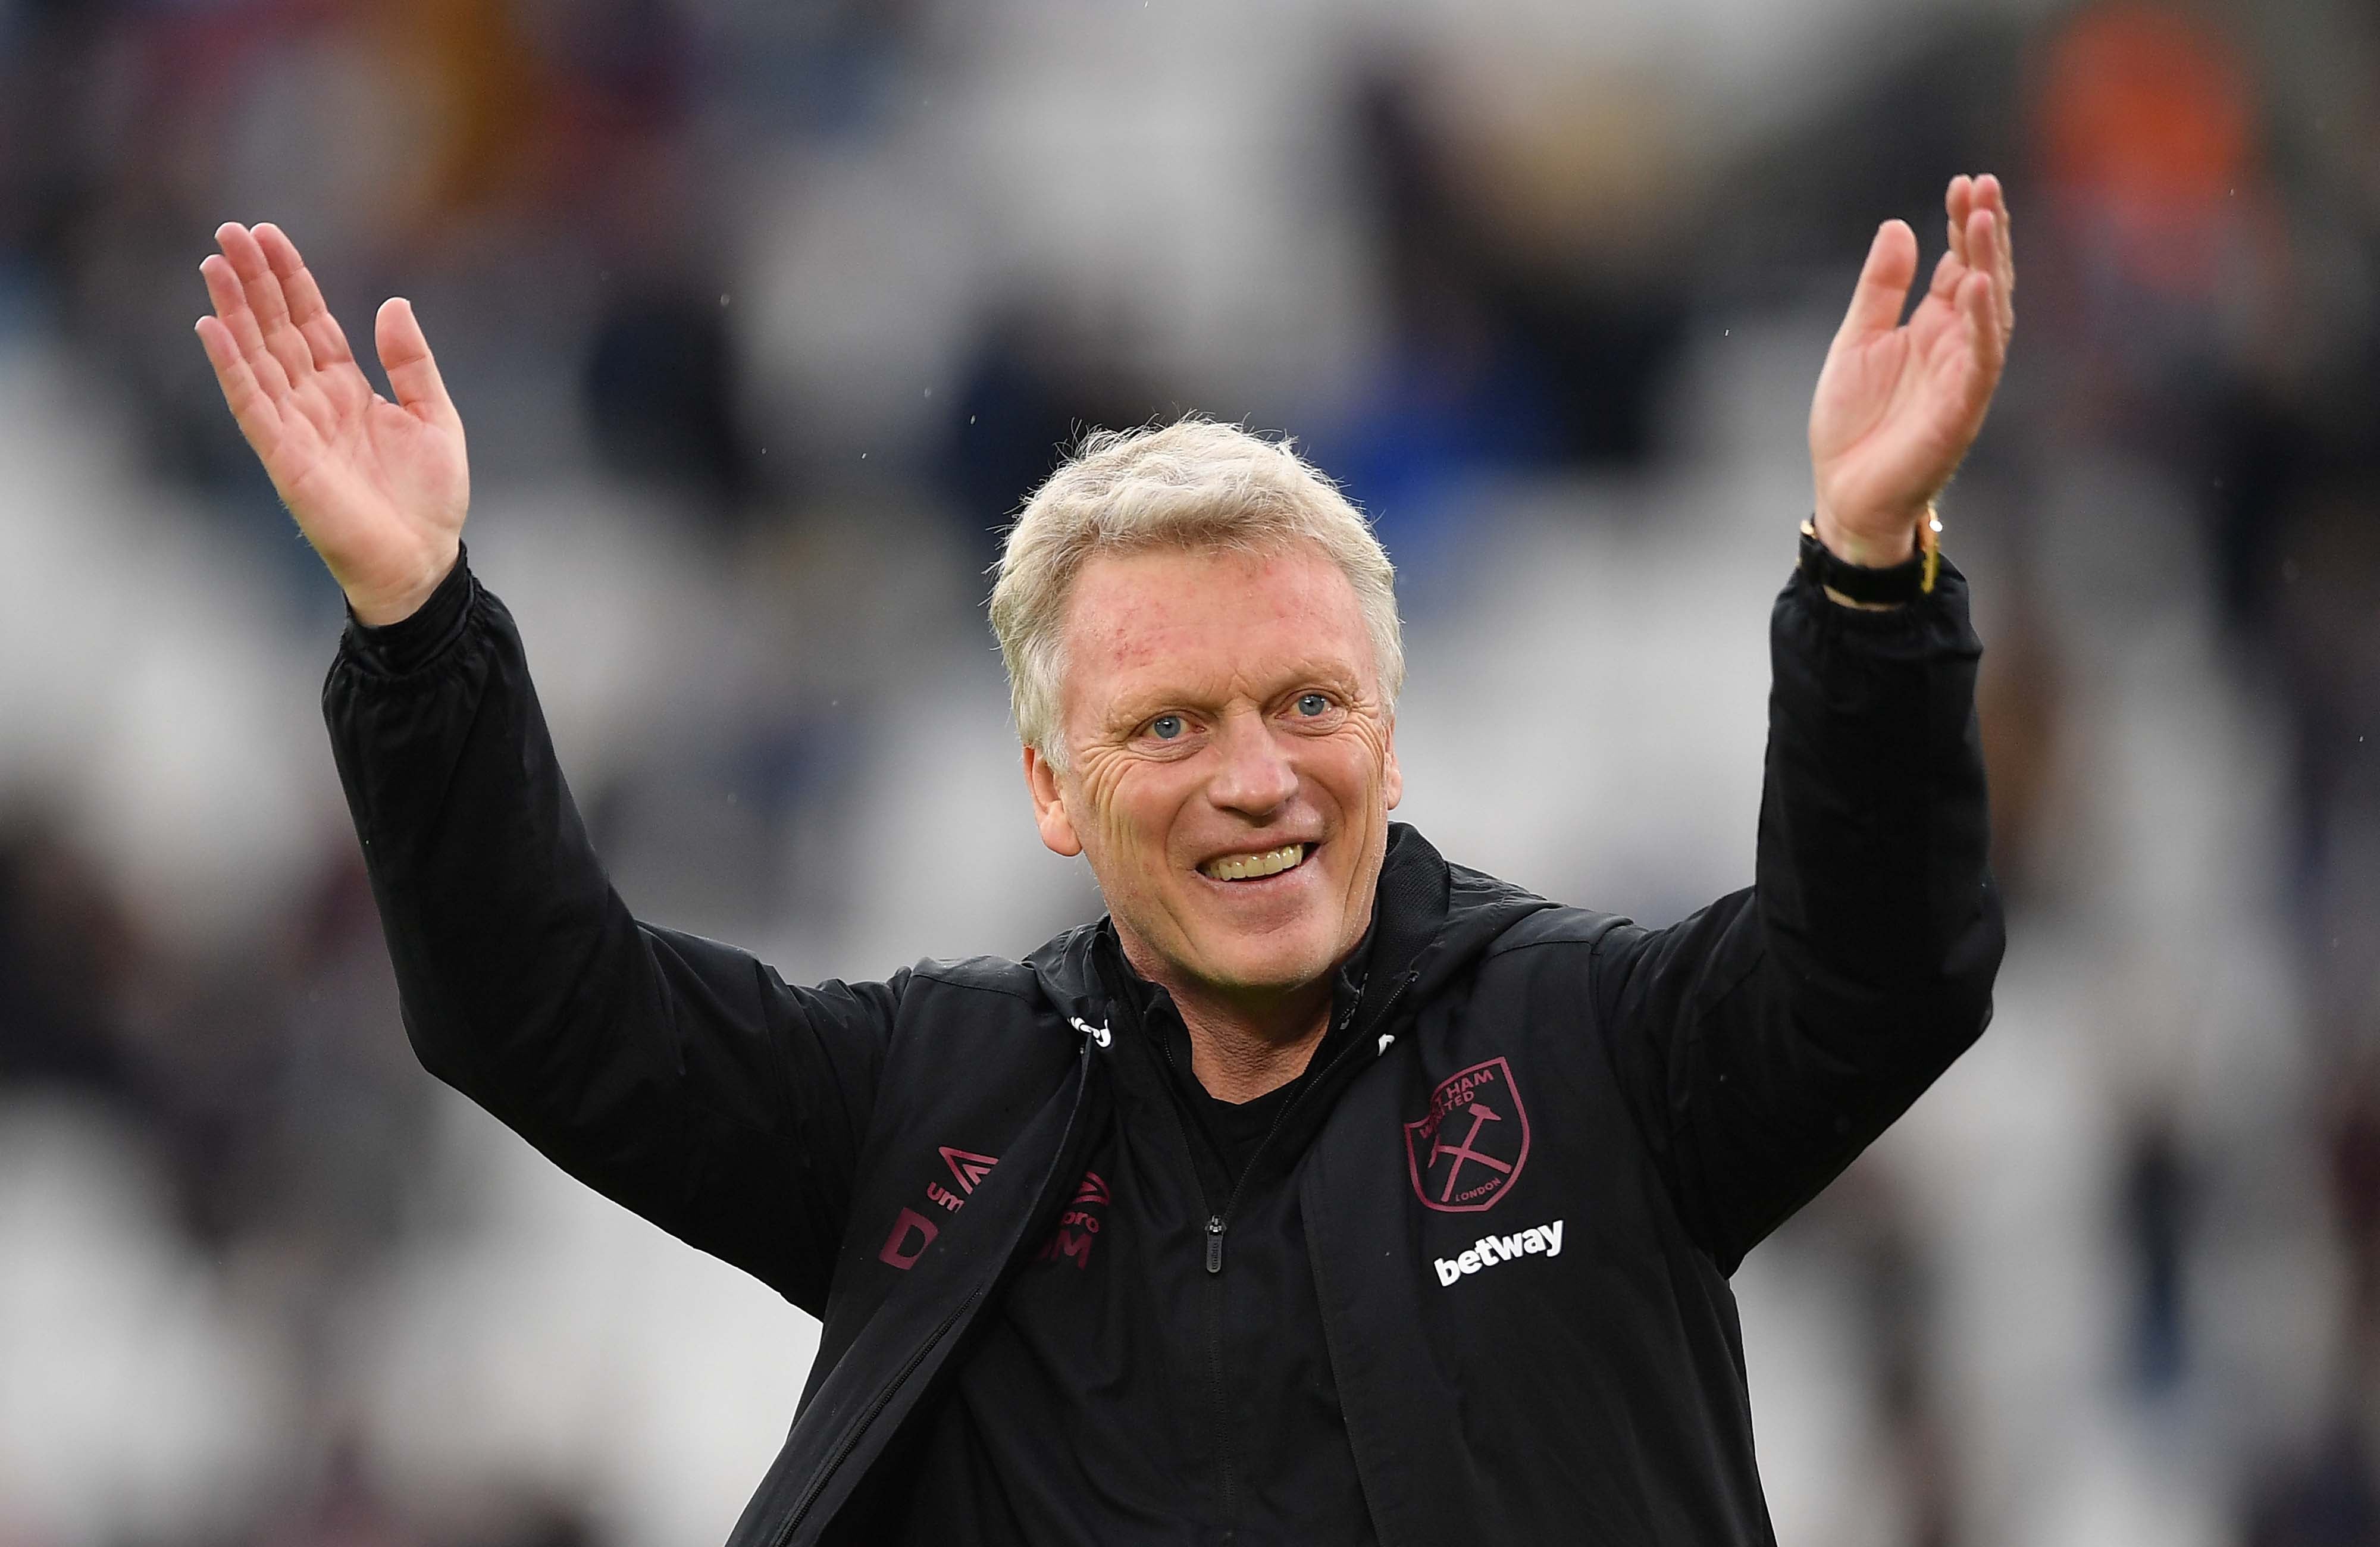 West Ham manager David Moyes insists his side are “not imposters” as they sit fourth in the Premier League table (Justin Tallis/PA)